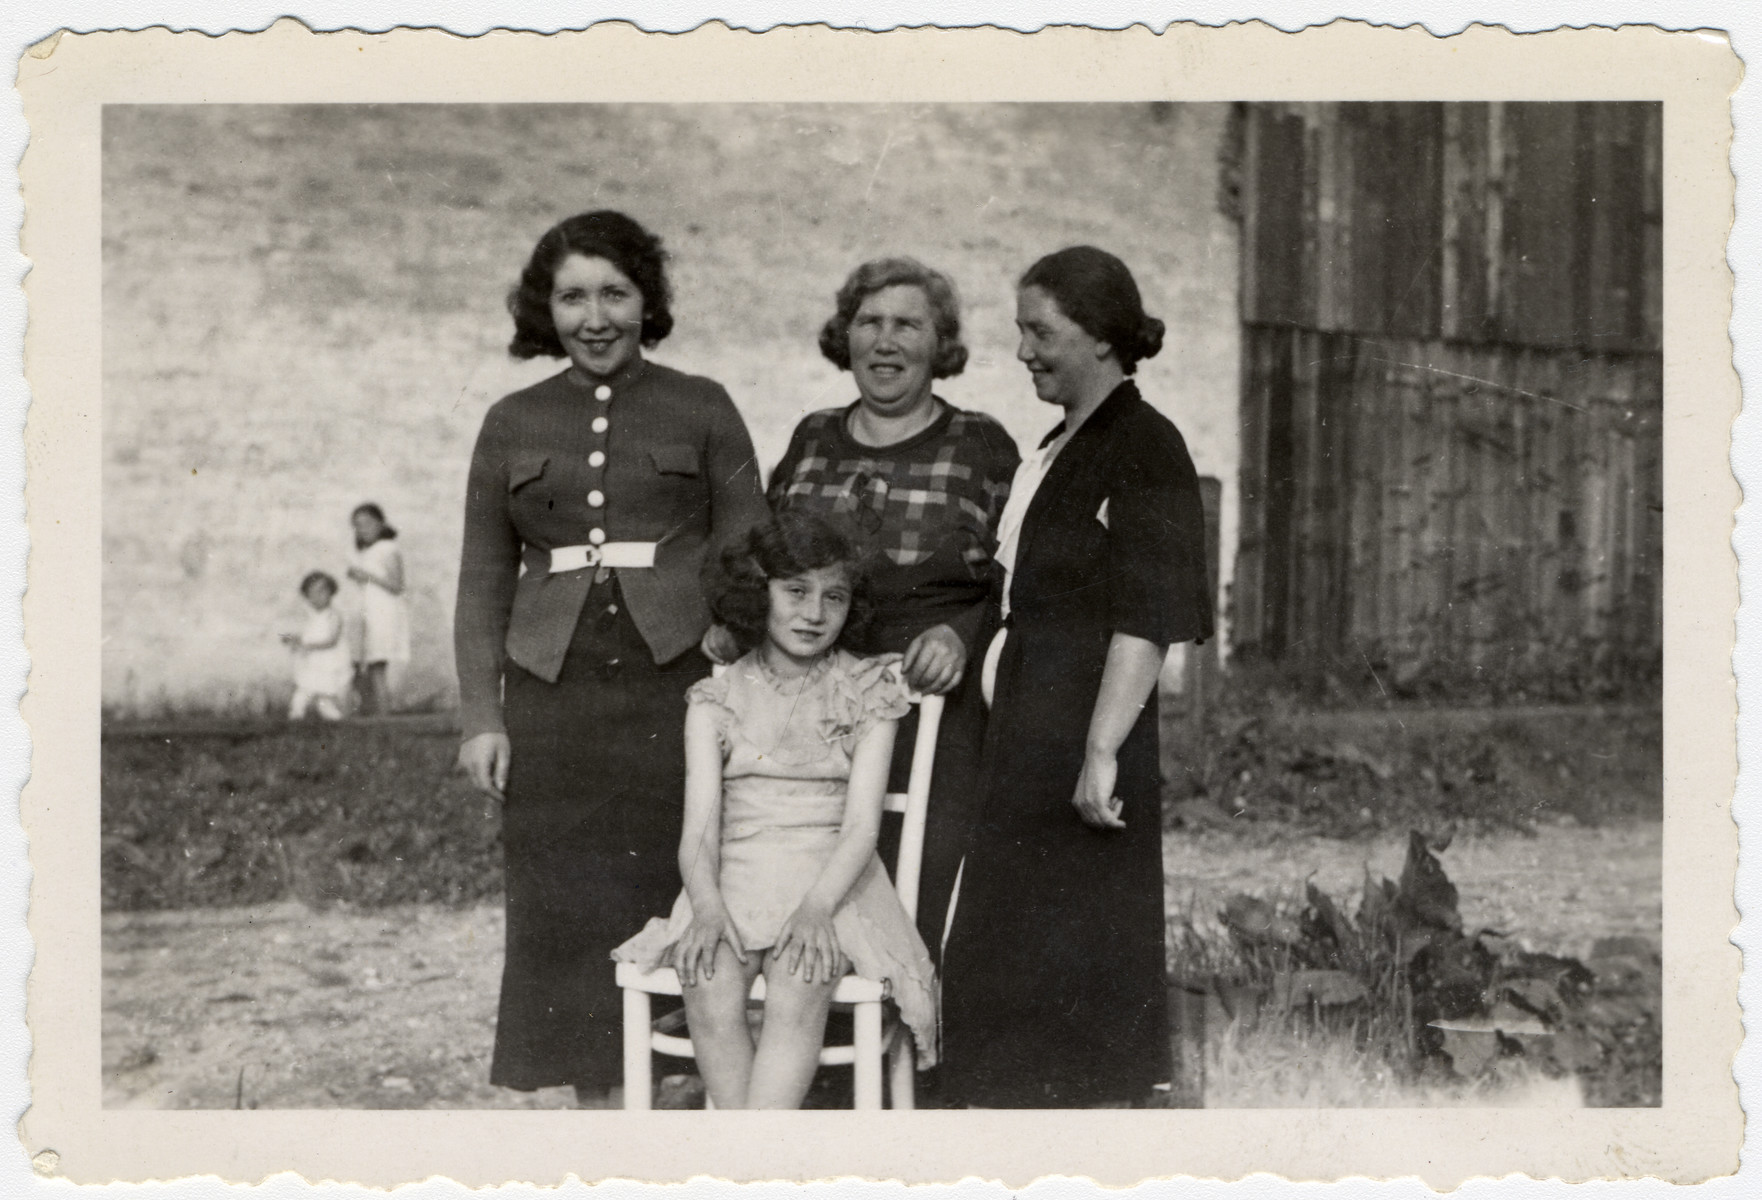 Group portrait Cesia Ritter (née Honig) pictured seated with mother, Malka Honig on right and two aunts to the left.